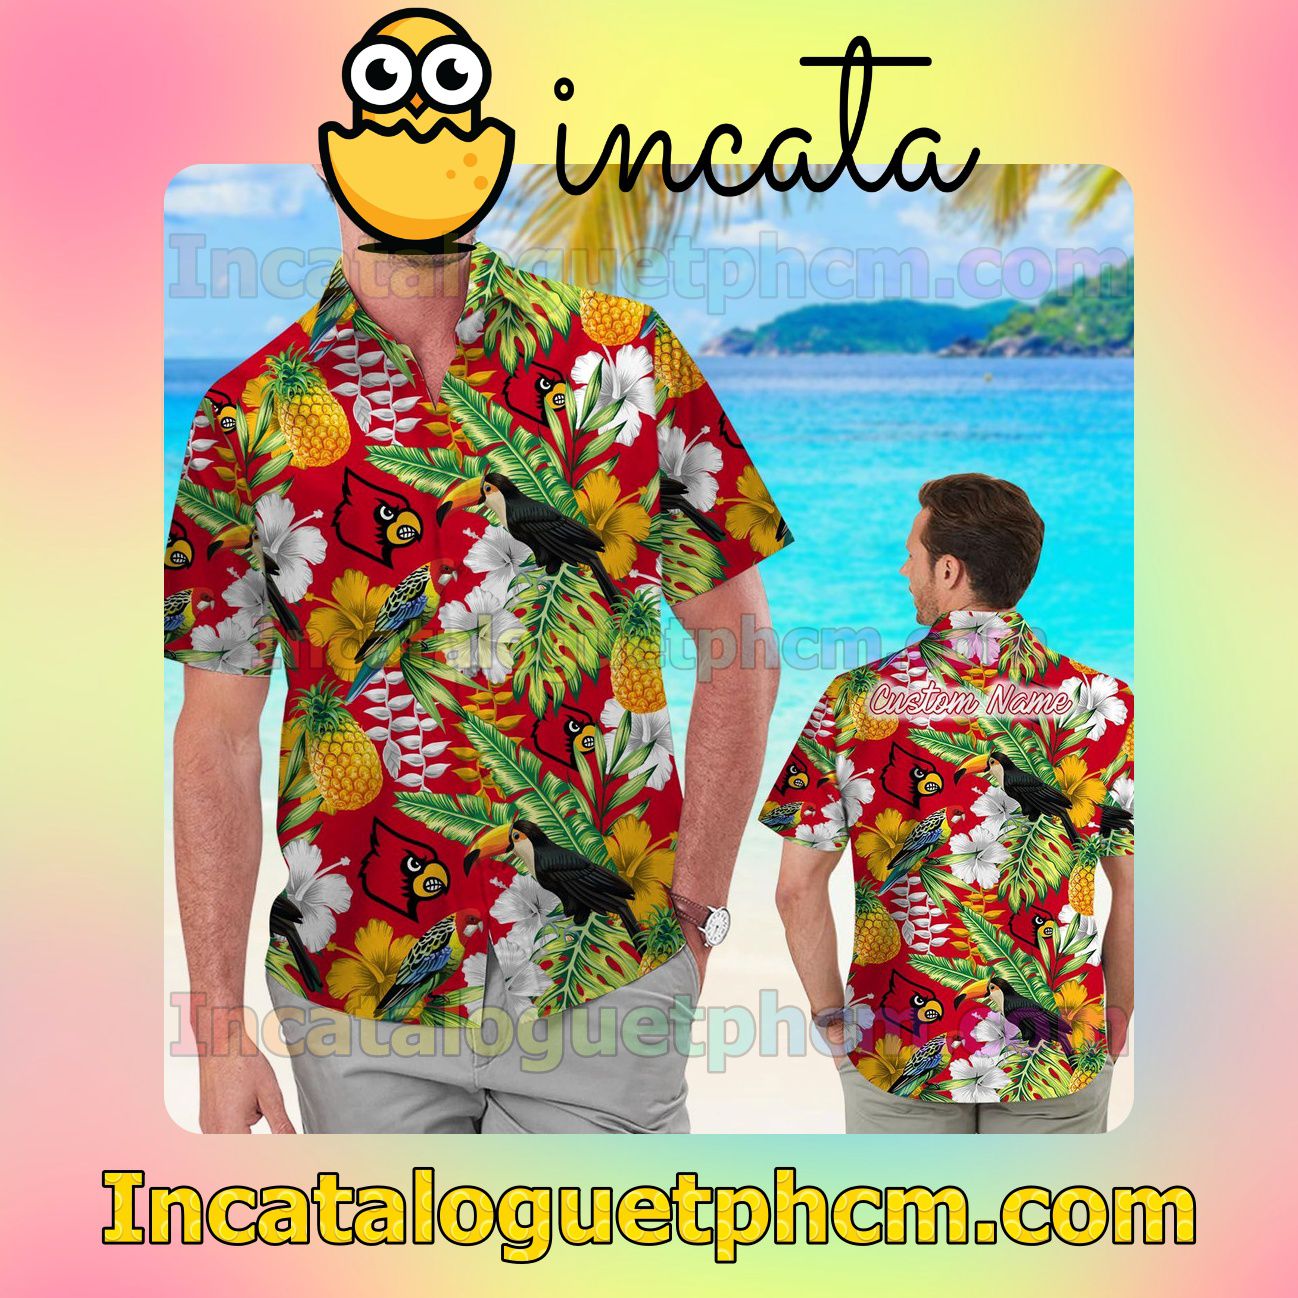 Personalized Louisville Cardinals Parrot Floral Tropical Beach Vacation Shirt, Swim Shorts